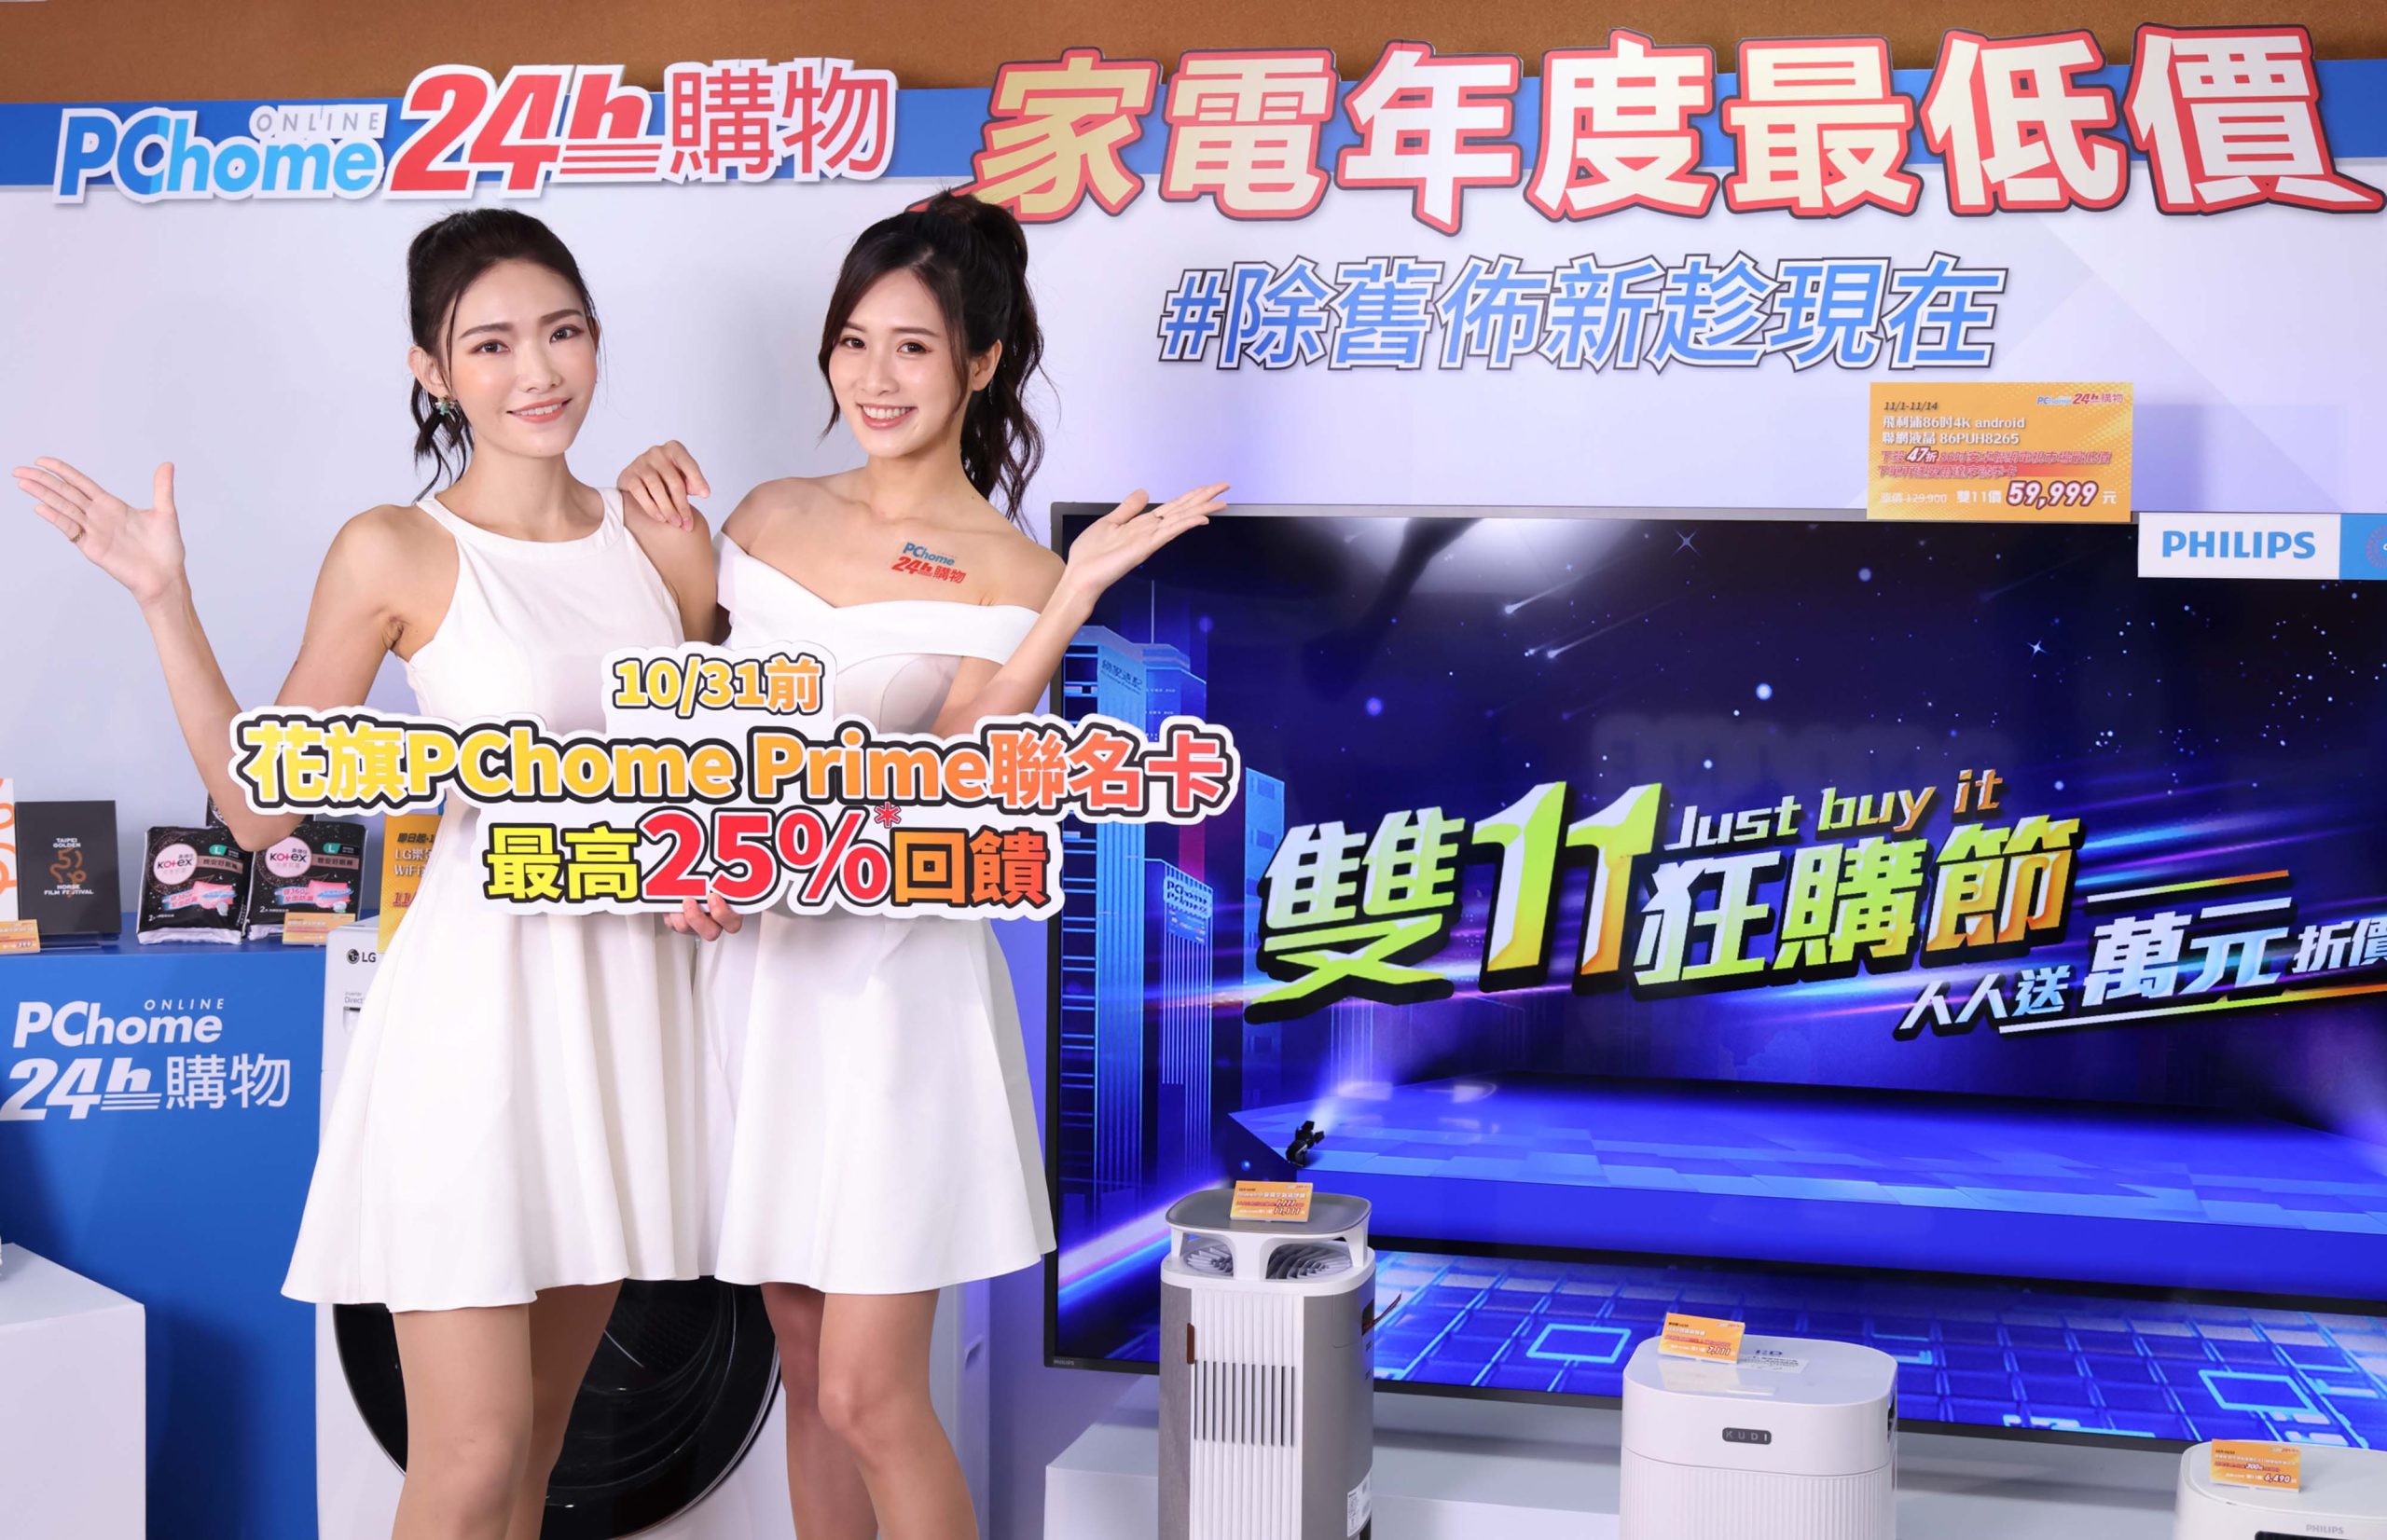 PChome 24h Shopping Officially Launches Double 11 Shopping Festival! A NT$10,000 Coupon Is Available for Everyone Against Inflation